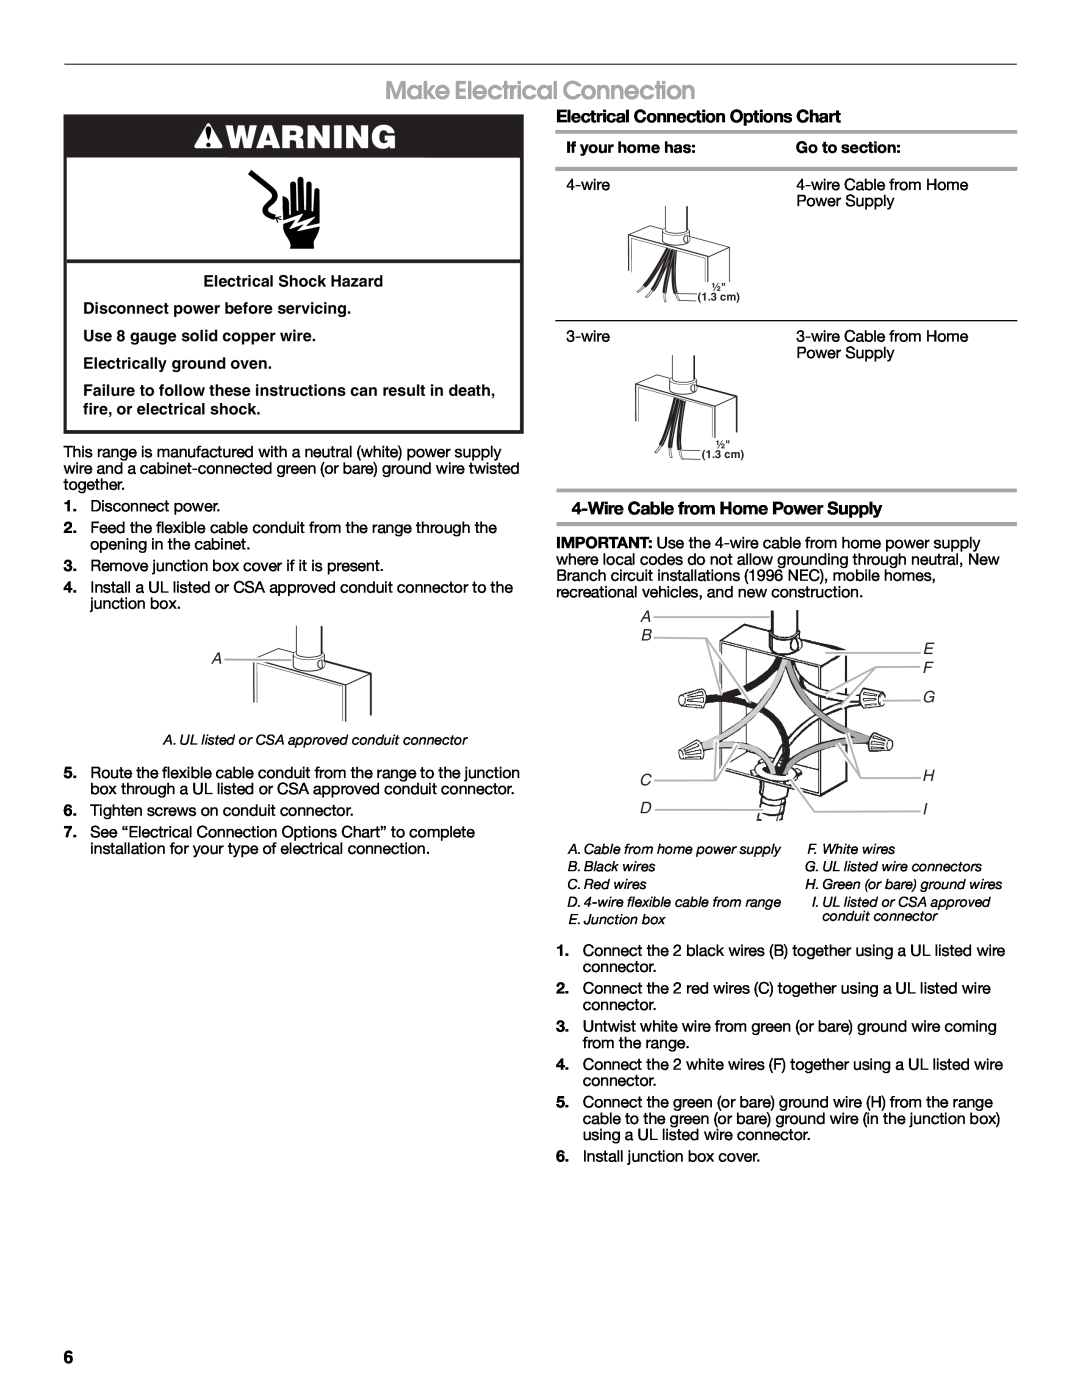 Whirlpool W10044940 Make Electrical Connection, Electrical Connection Options Chart, Wire Cable from Home Power Supply 